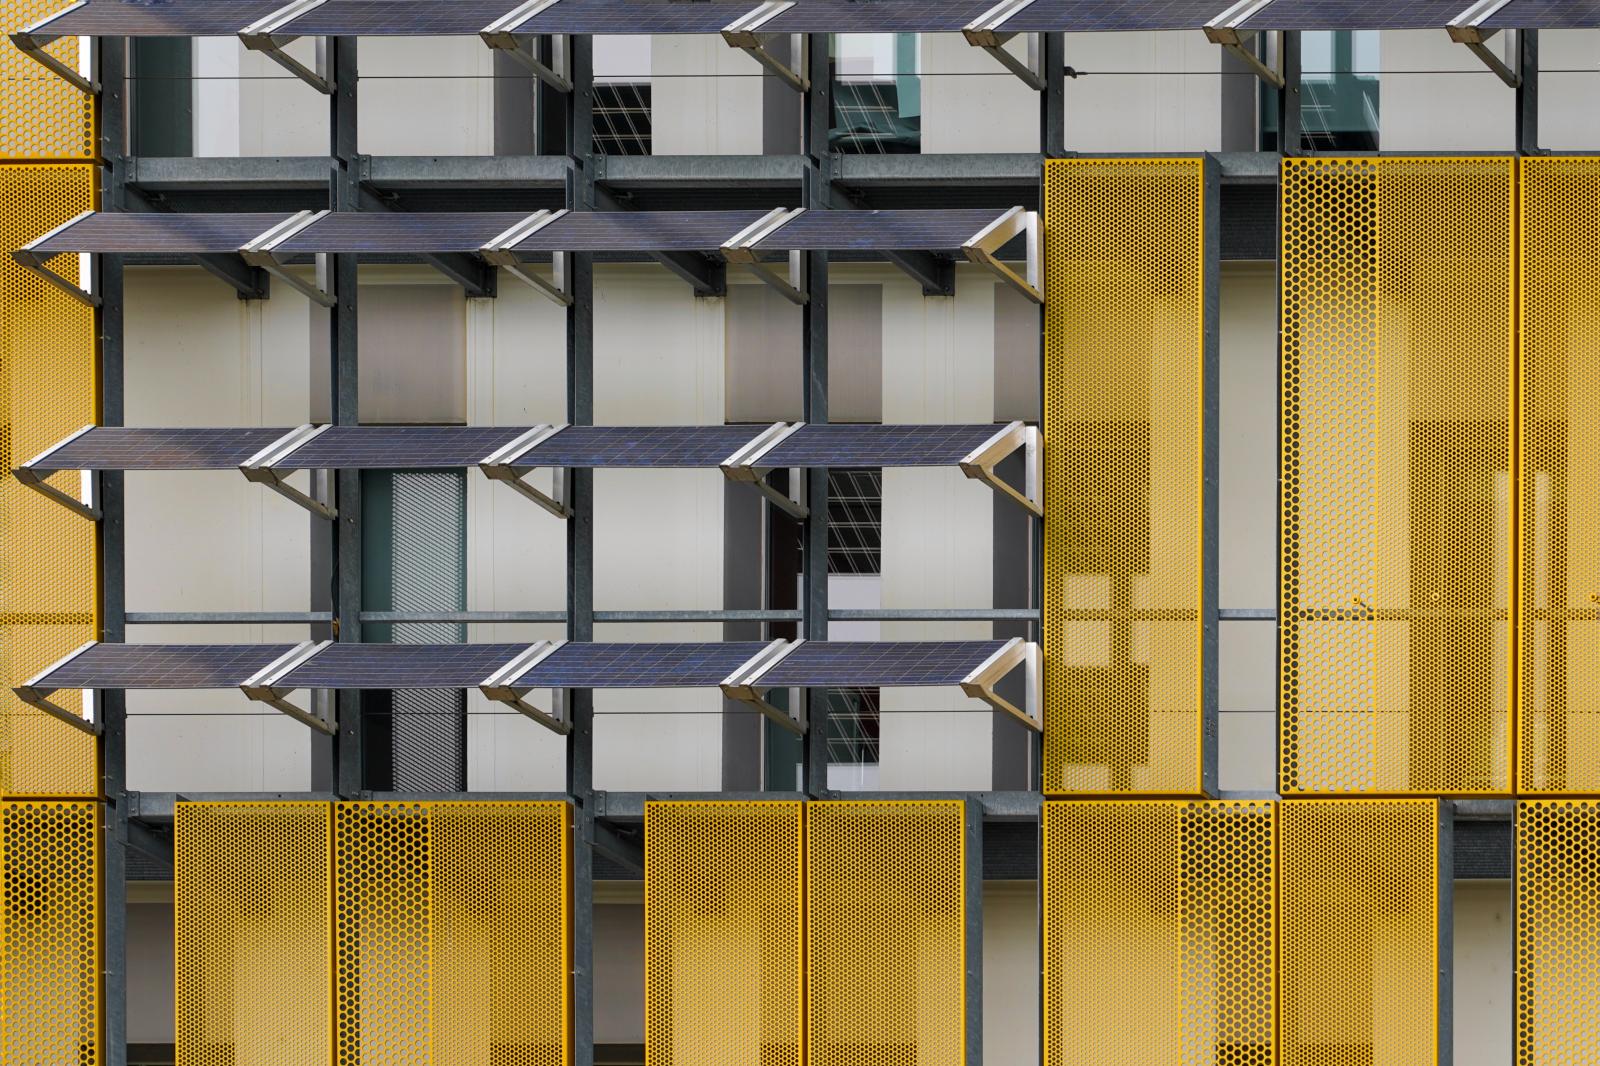 Image from New Photographs -  Grenoble, France  # 4281 4/2024 Dynamic Facade:...